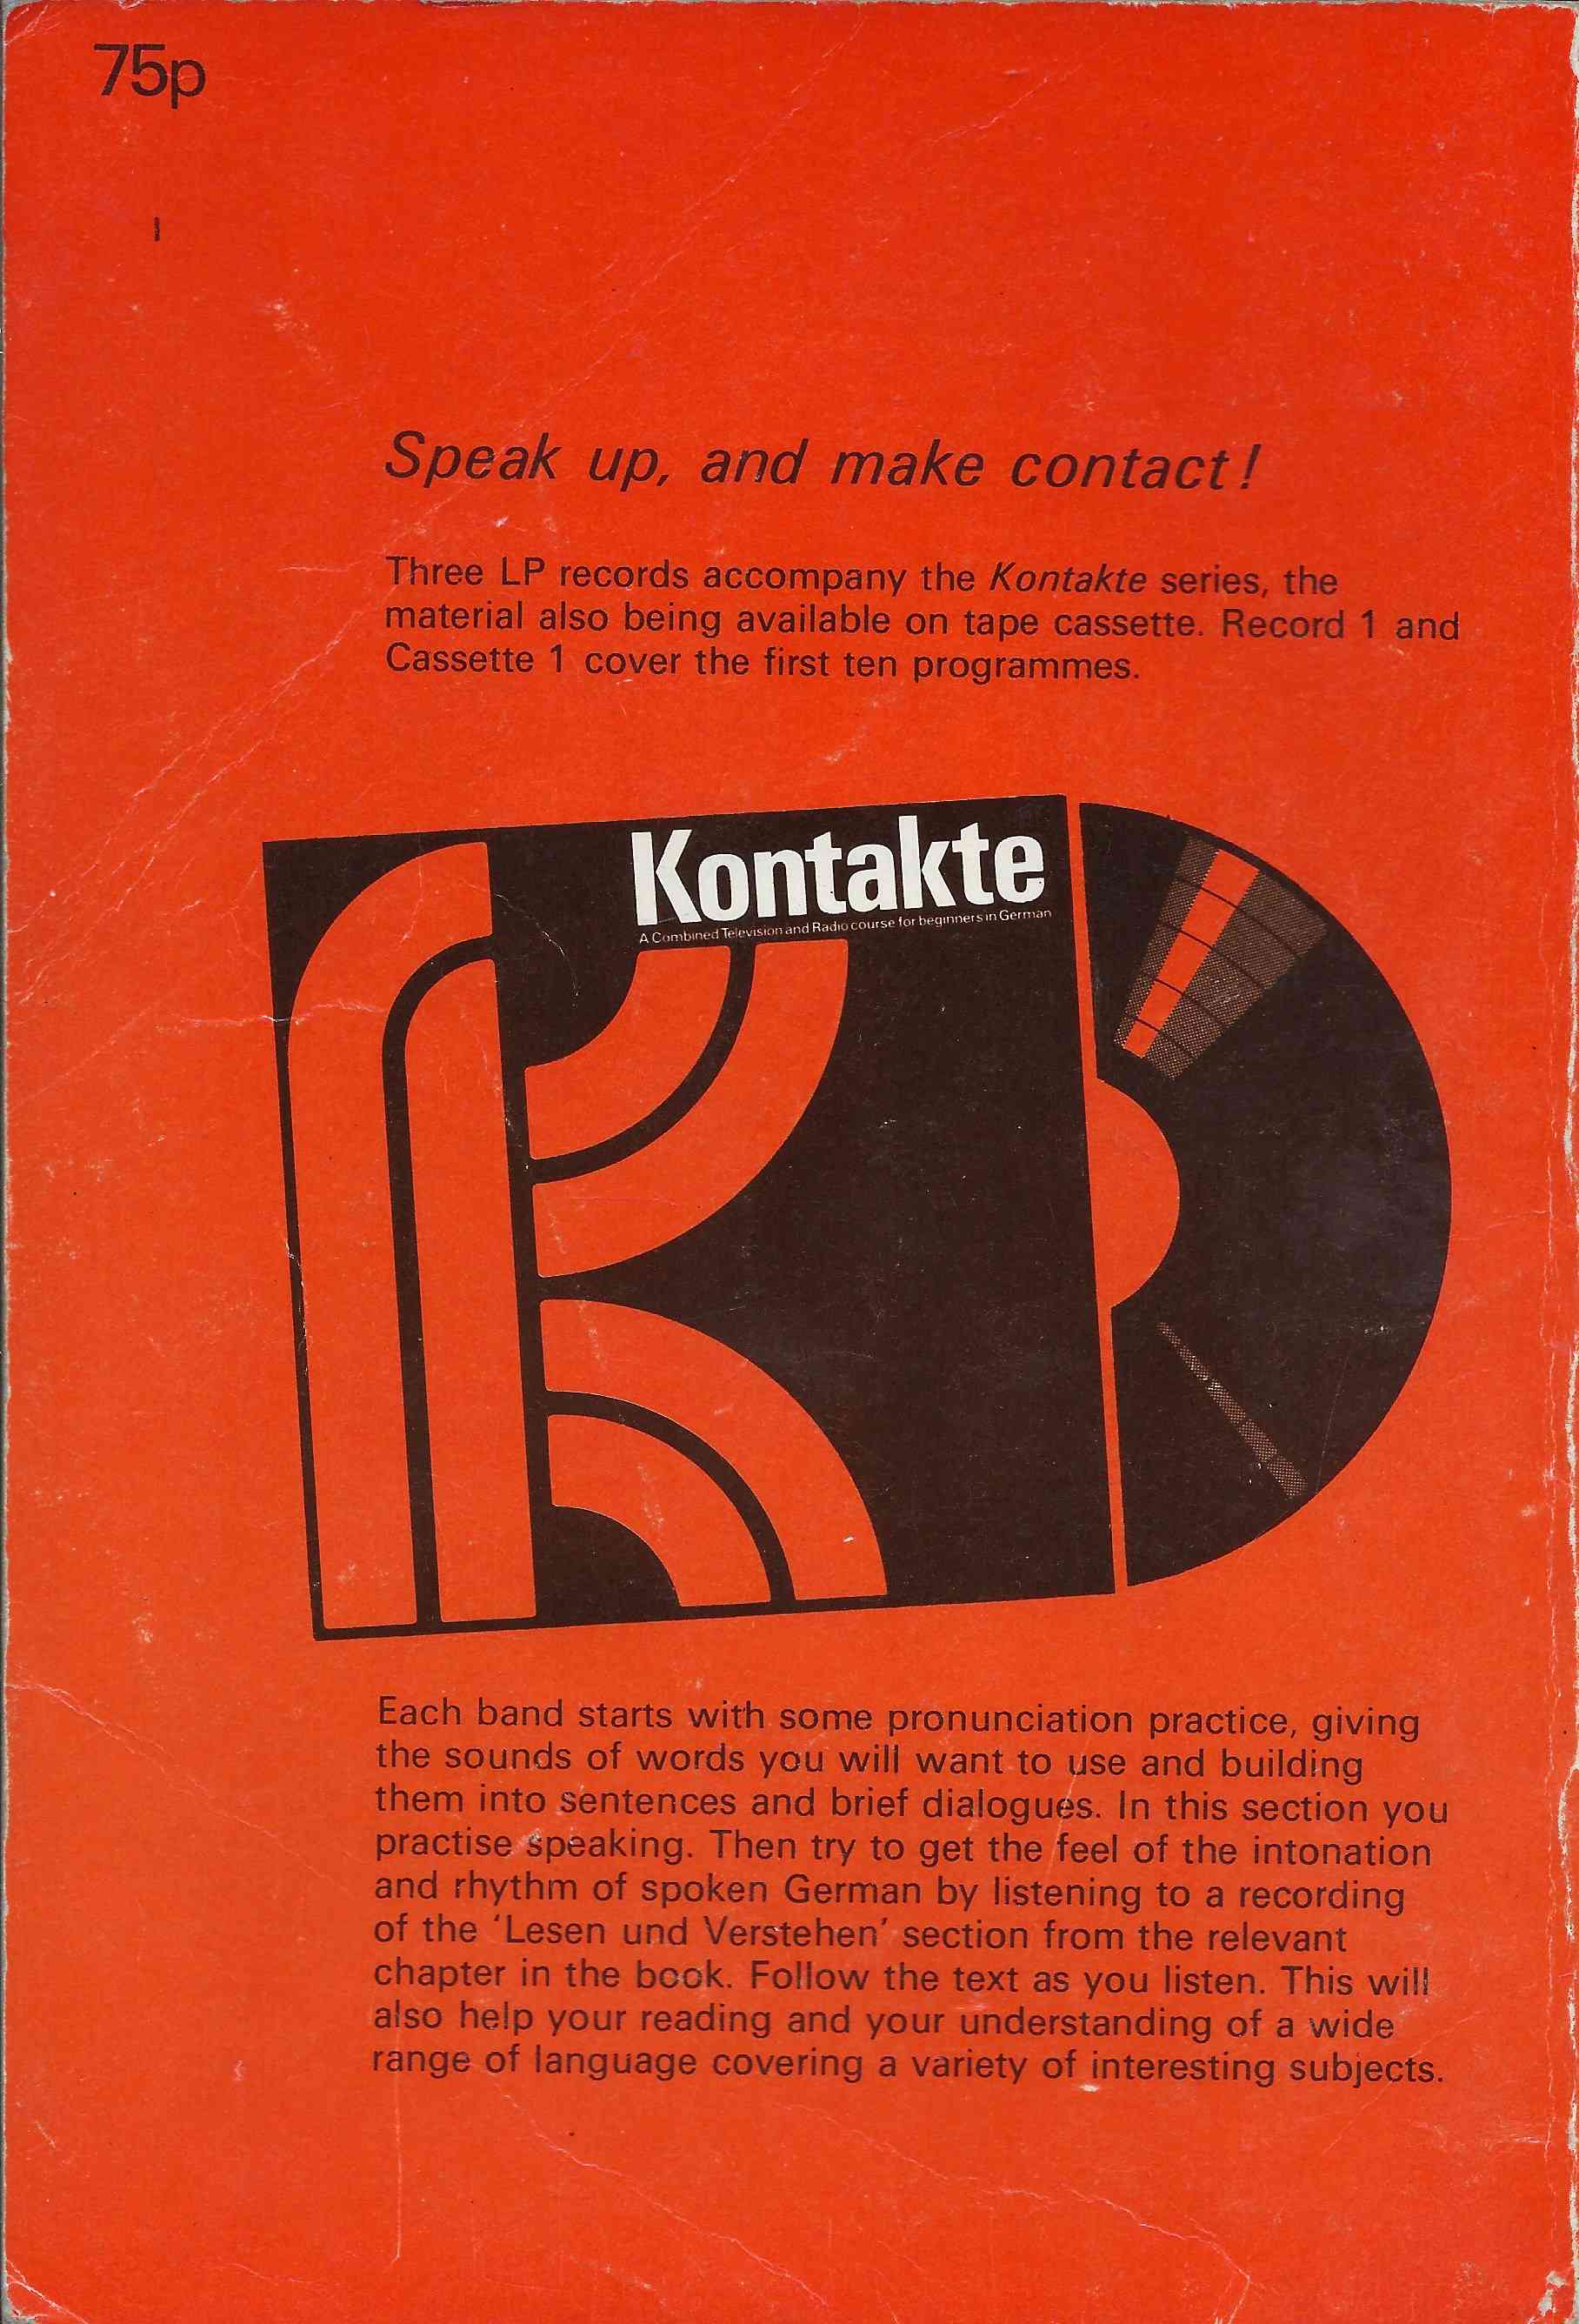 Picture of ISBN 0 563 10863 0 Kontakte 1 by artist Corinna Schabel / Antony Peck from the BBC records and Tapes library